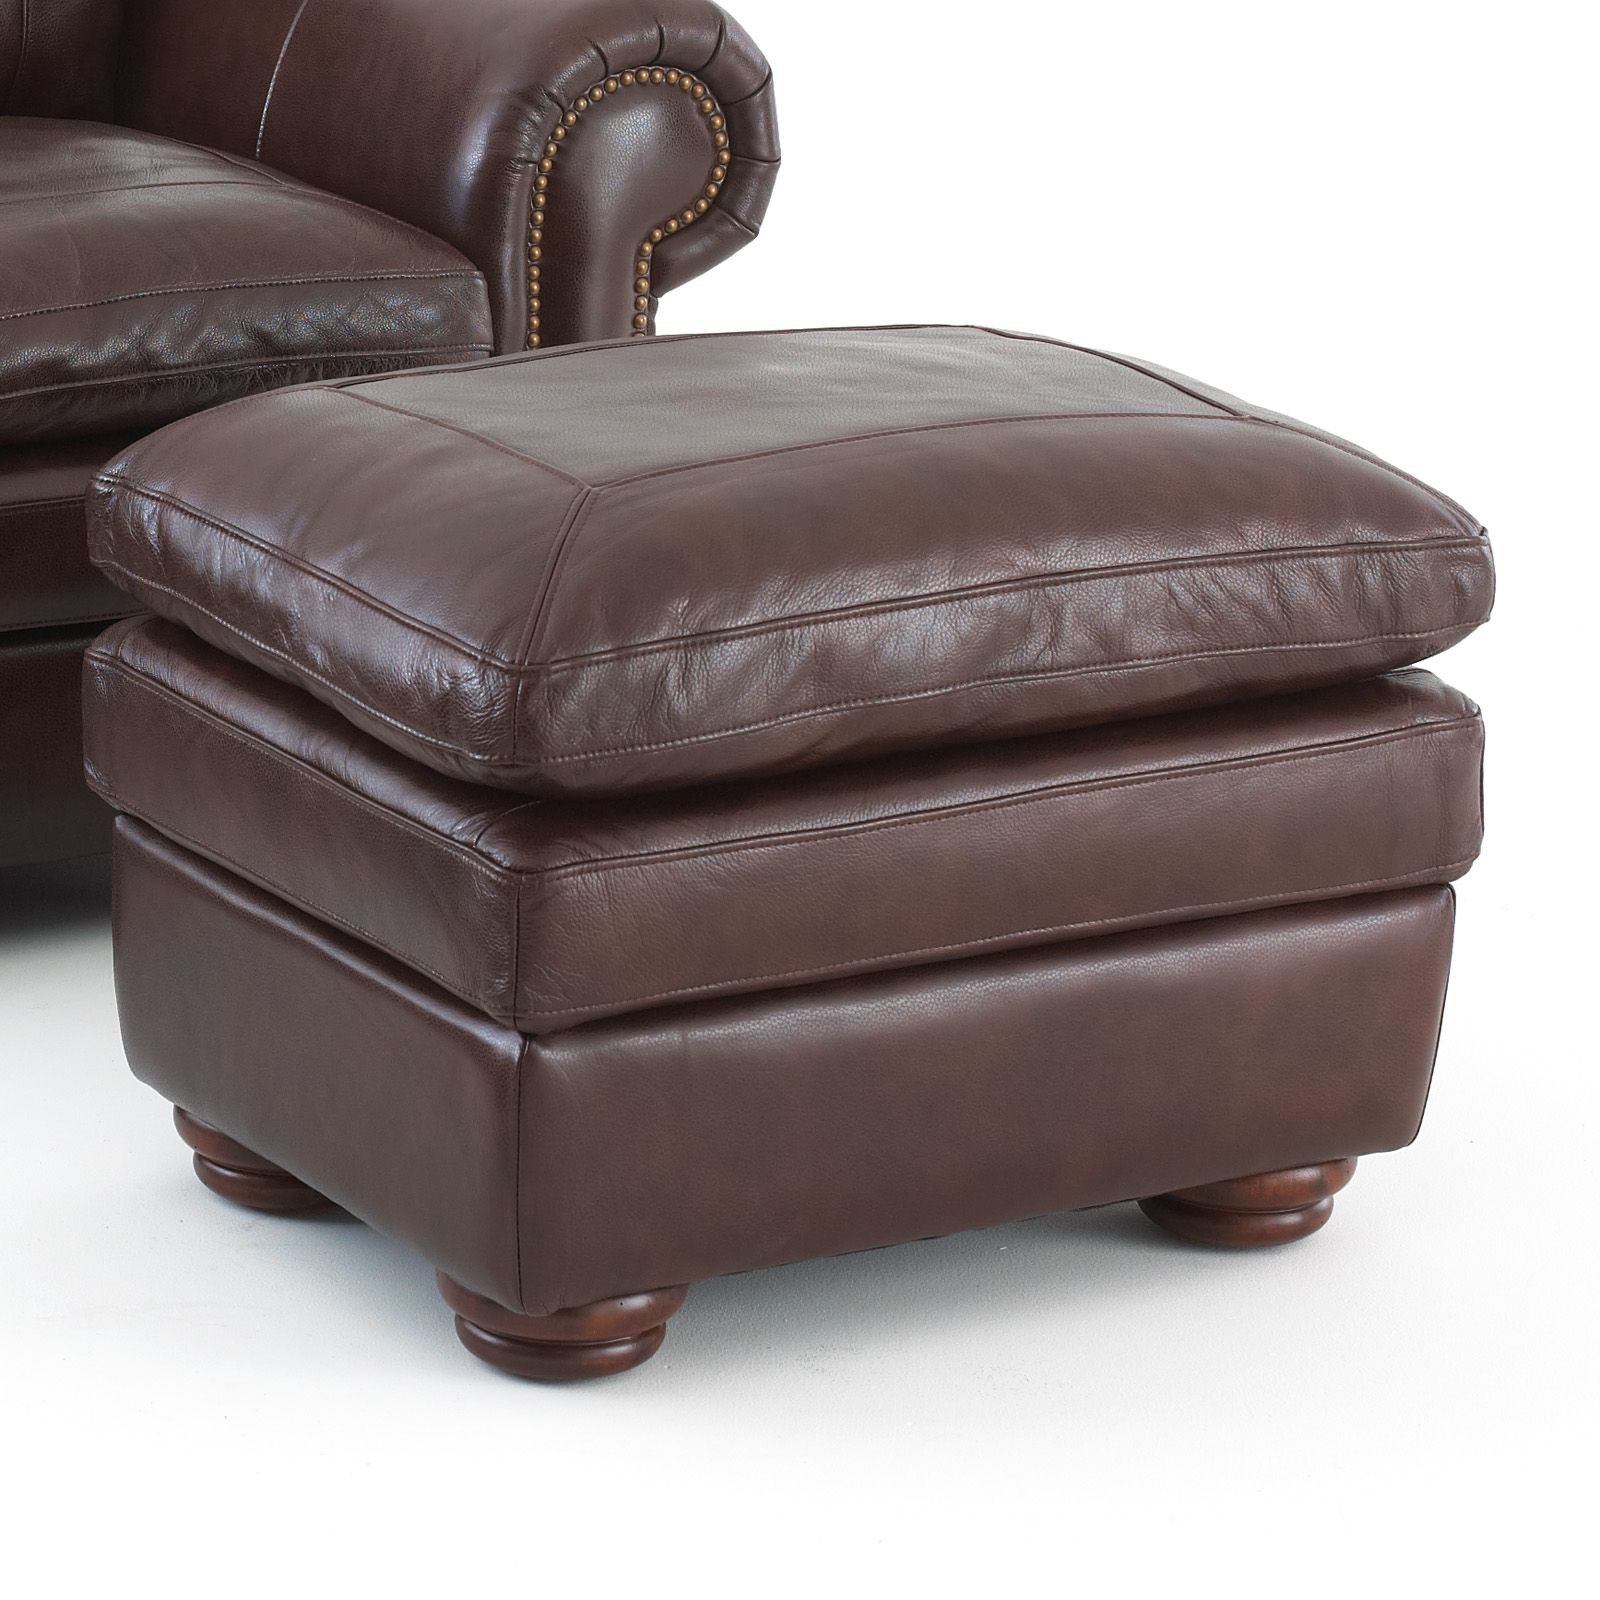 Steve Silver Yosemite Leather Ottoman – Chestnut At Hayneedle With Weathered Silver Leather Hide Pouf Ottomans (View 10 of 20)